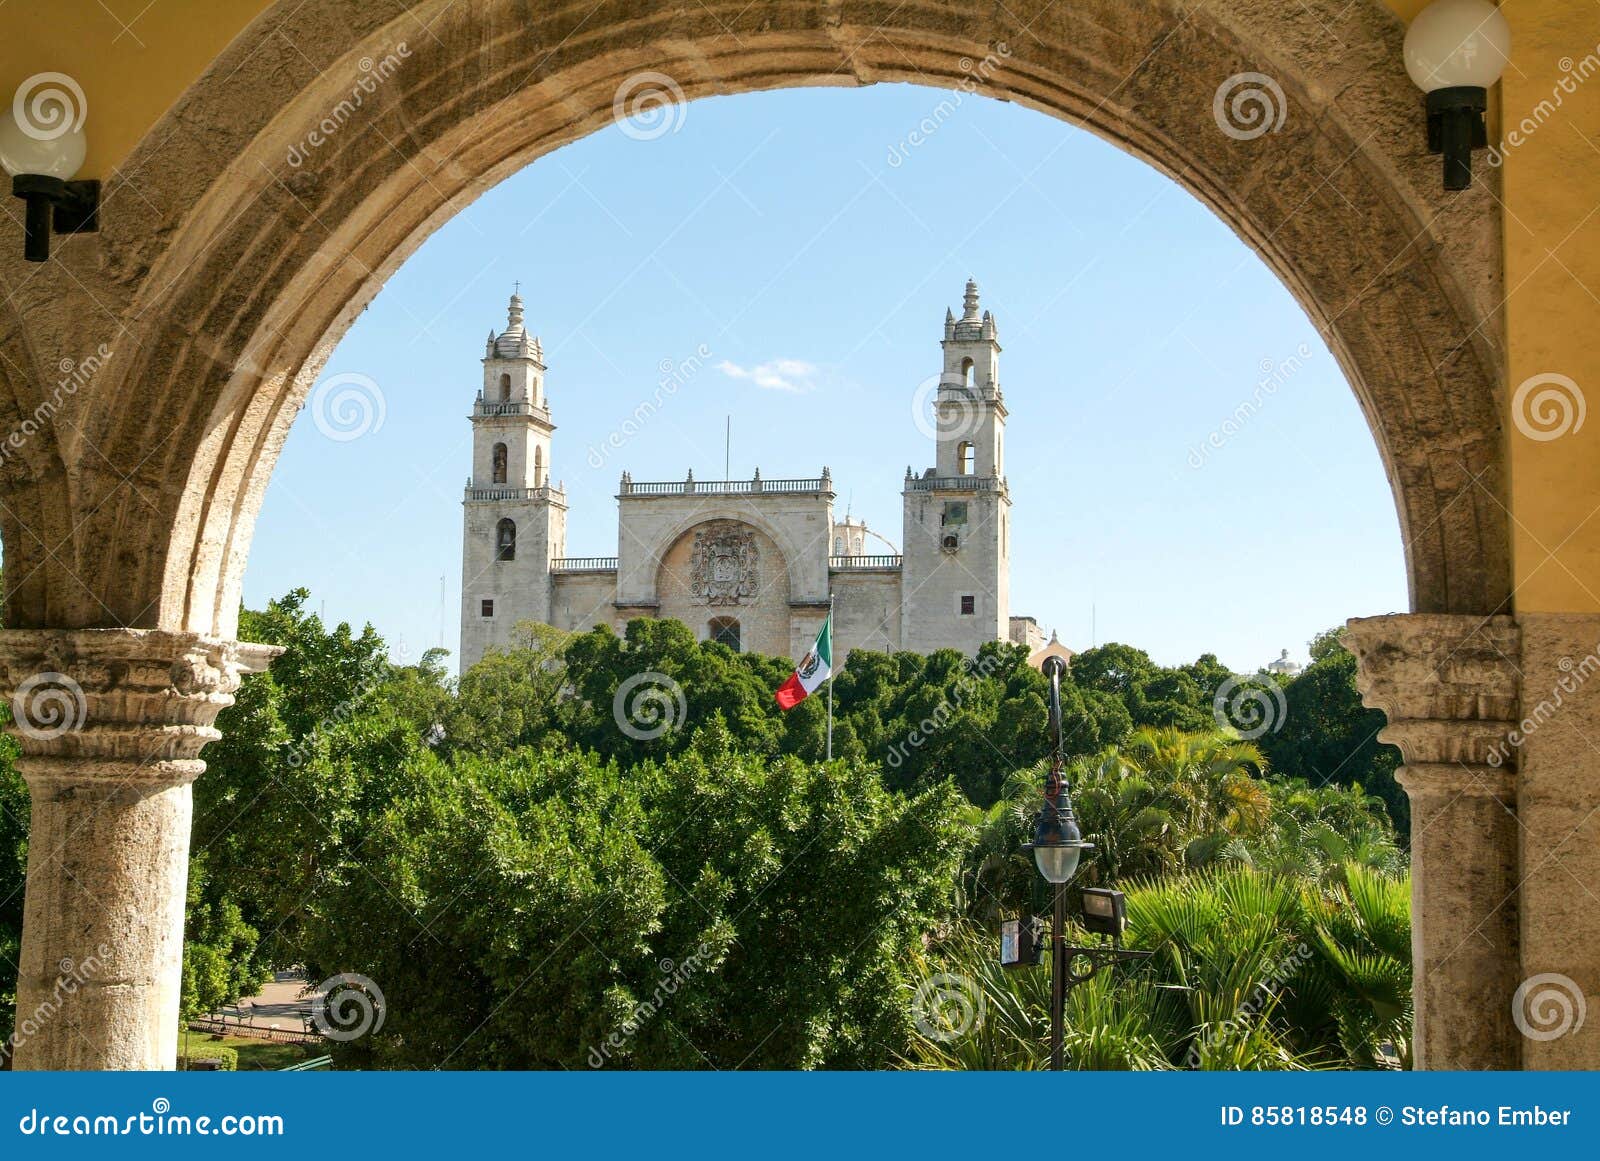 the cathedral of merida on yucatan